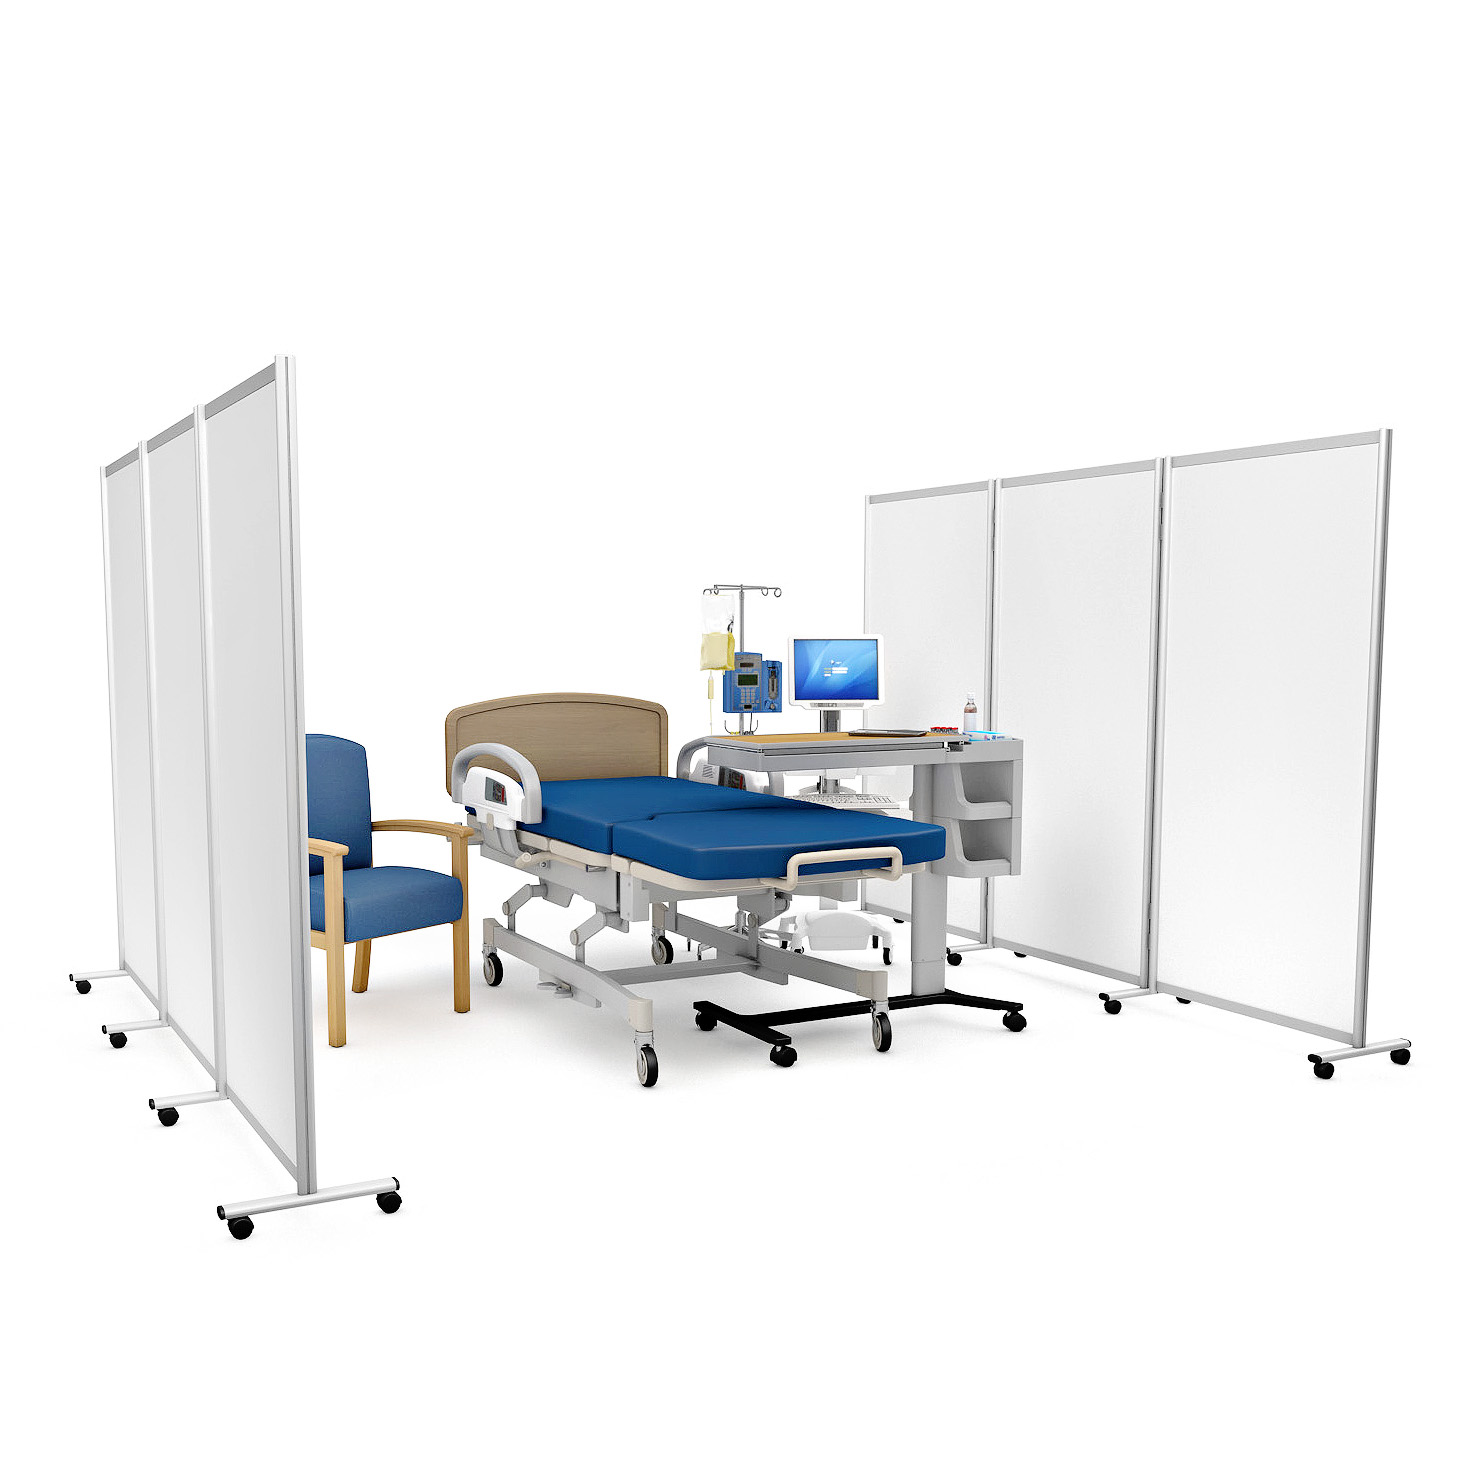 GUARDIAN DIGNITY® Mobile Medical Screens Provide Privacy For Patients On Hospital Ward